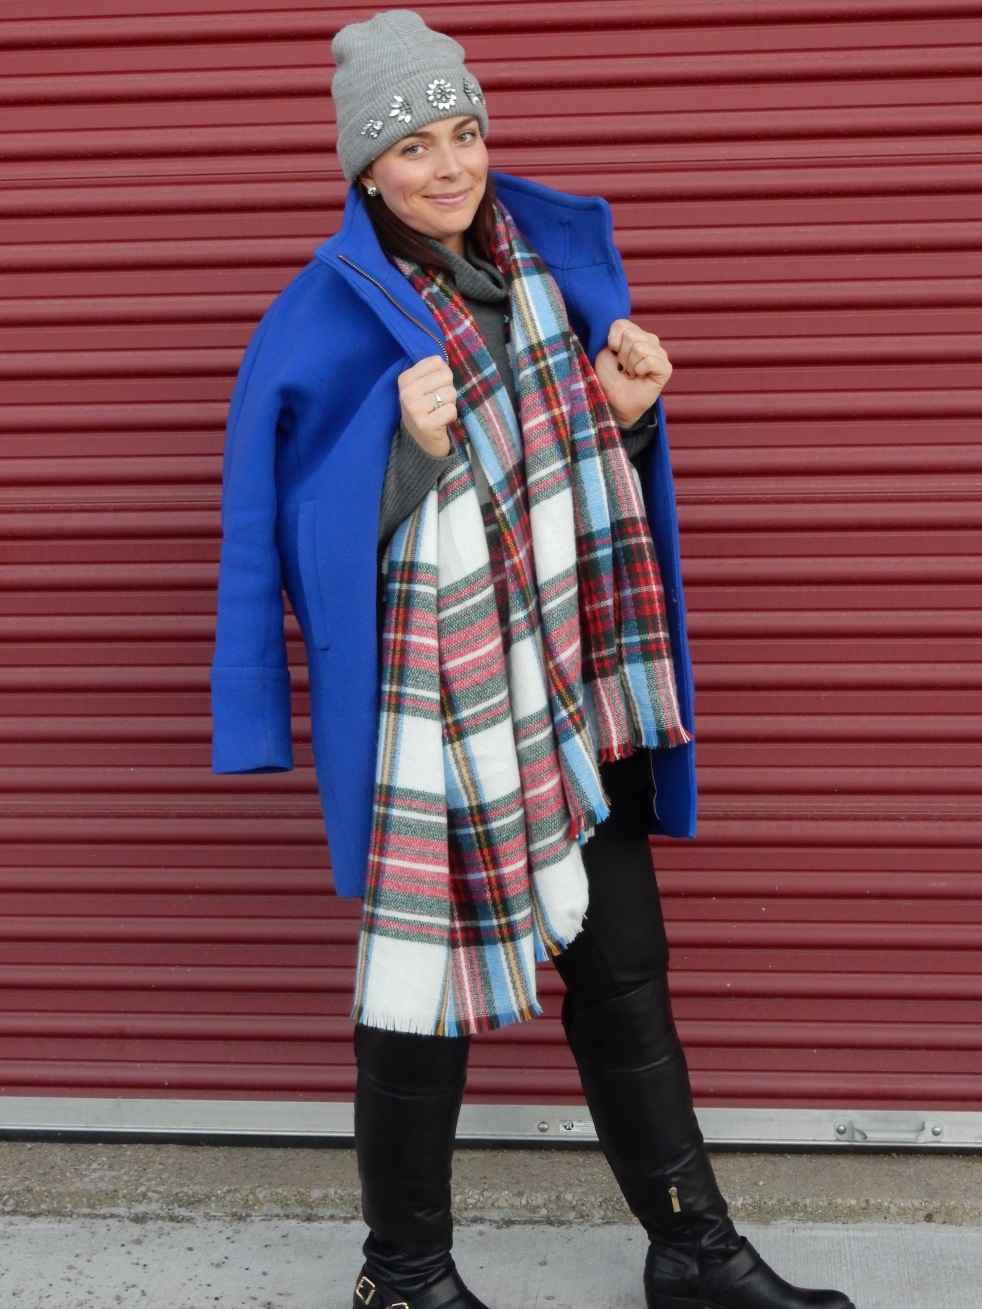 Winter coats, blue winter coat, colorful winter coats, blinged beanie, sarah in style, sarahinstyle.com, sarah meyer, plaid scarf, loft, ann taylor, j. crew, vince camuto, windy city bloggers, fashion blogger, #wcbcstyle, chicago blogger, city style, celebrity pink